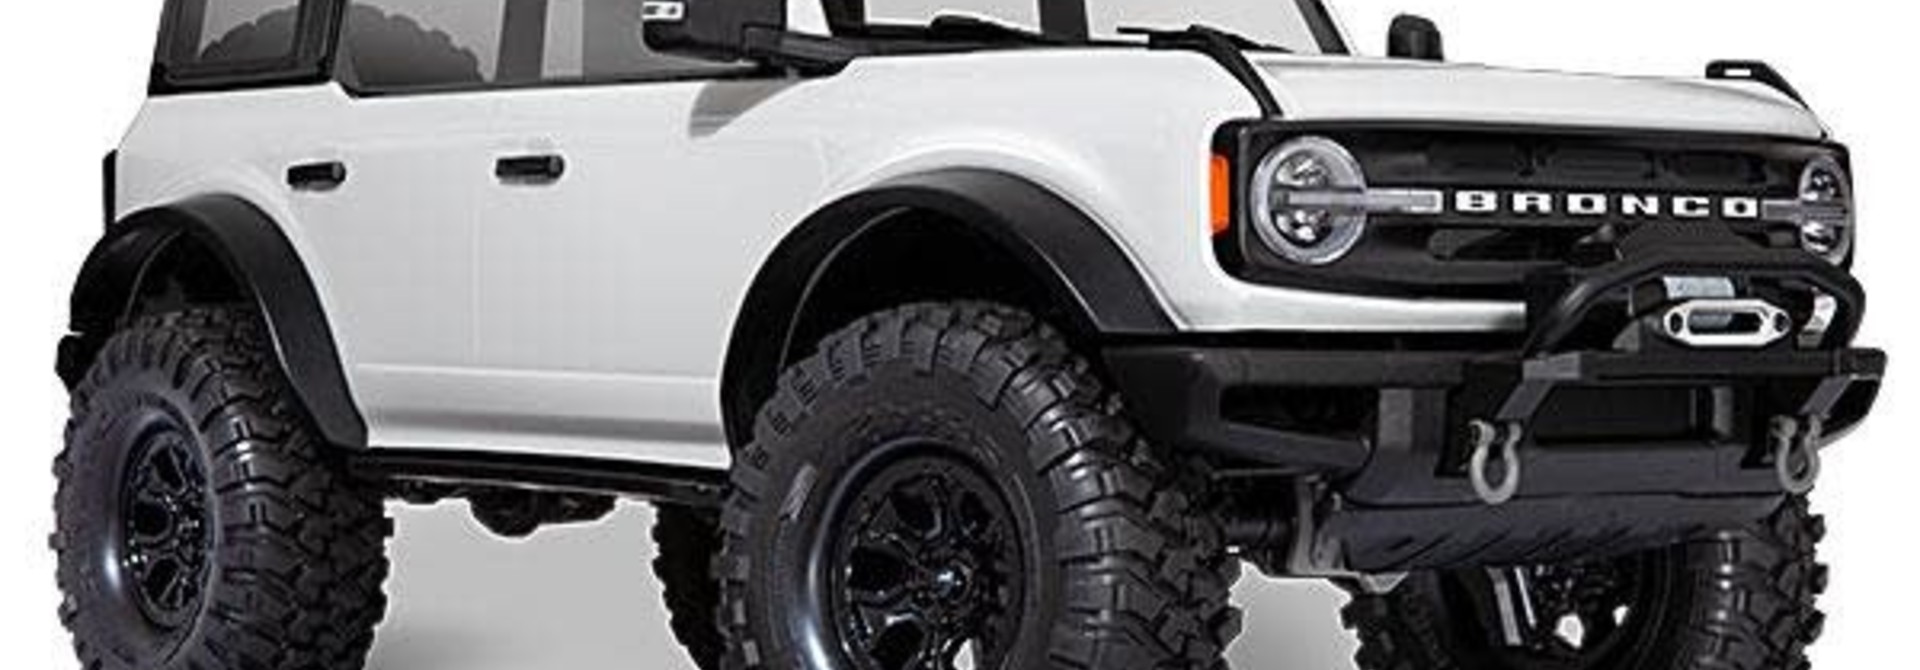 Traxxas TRX-4 Scale and Trail Crawler with 2021 Ford Bronco Body WHITE TRX92076-4WHT